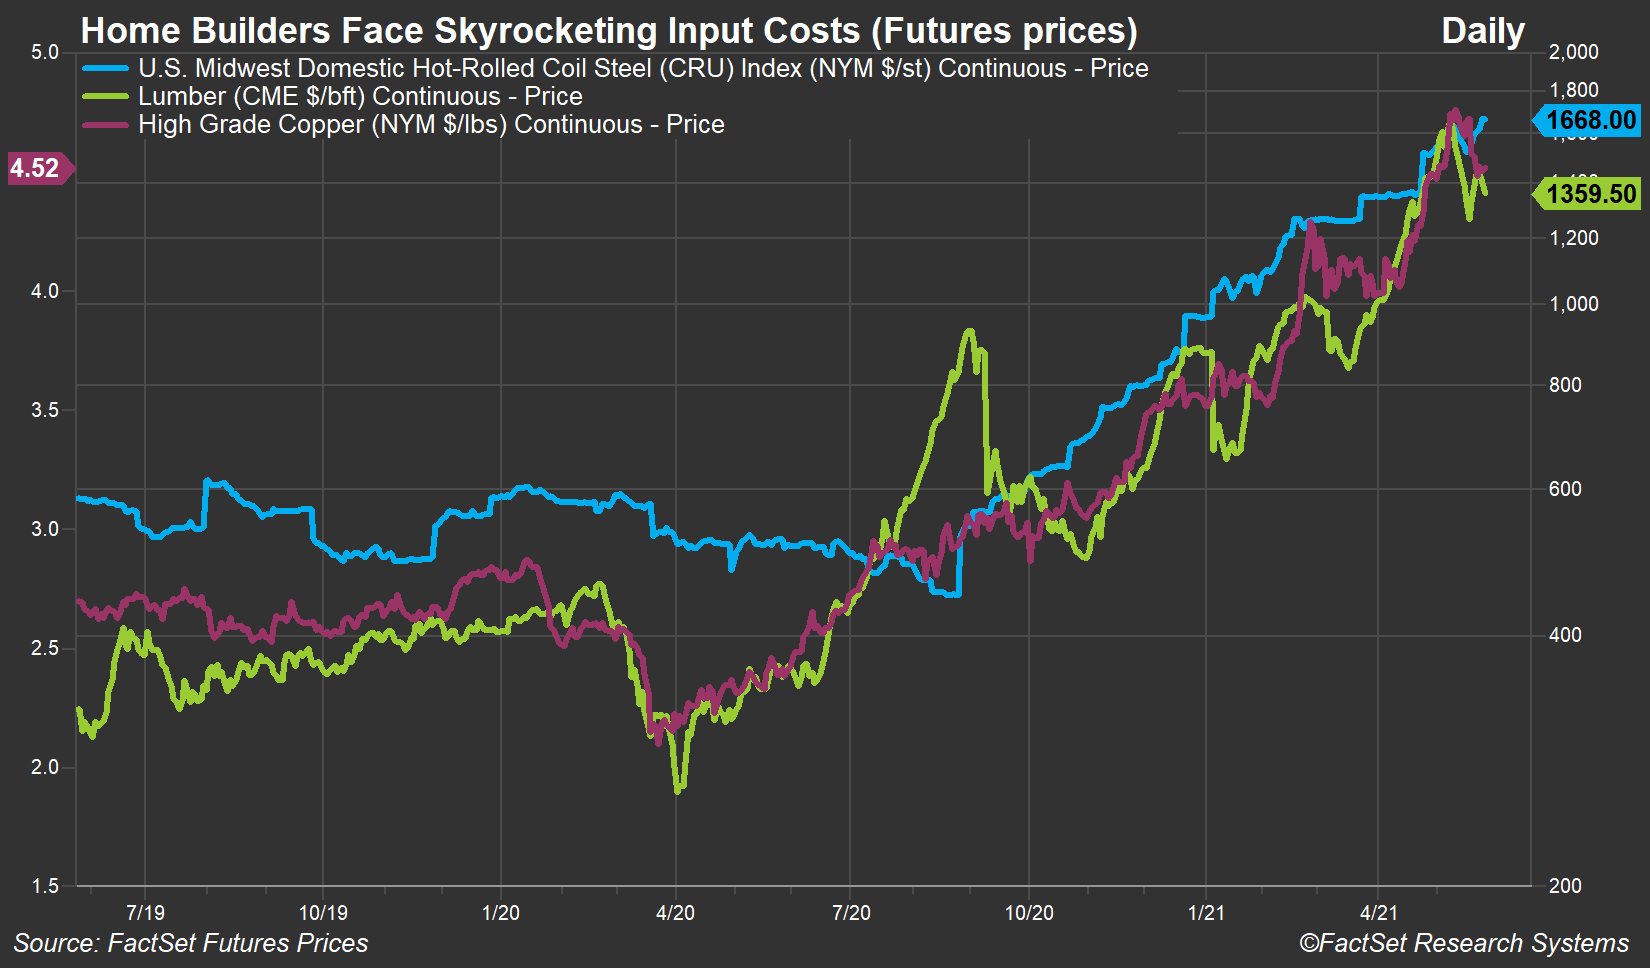 Futures Prices for Construction Inputs